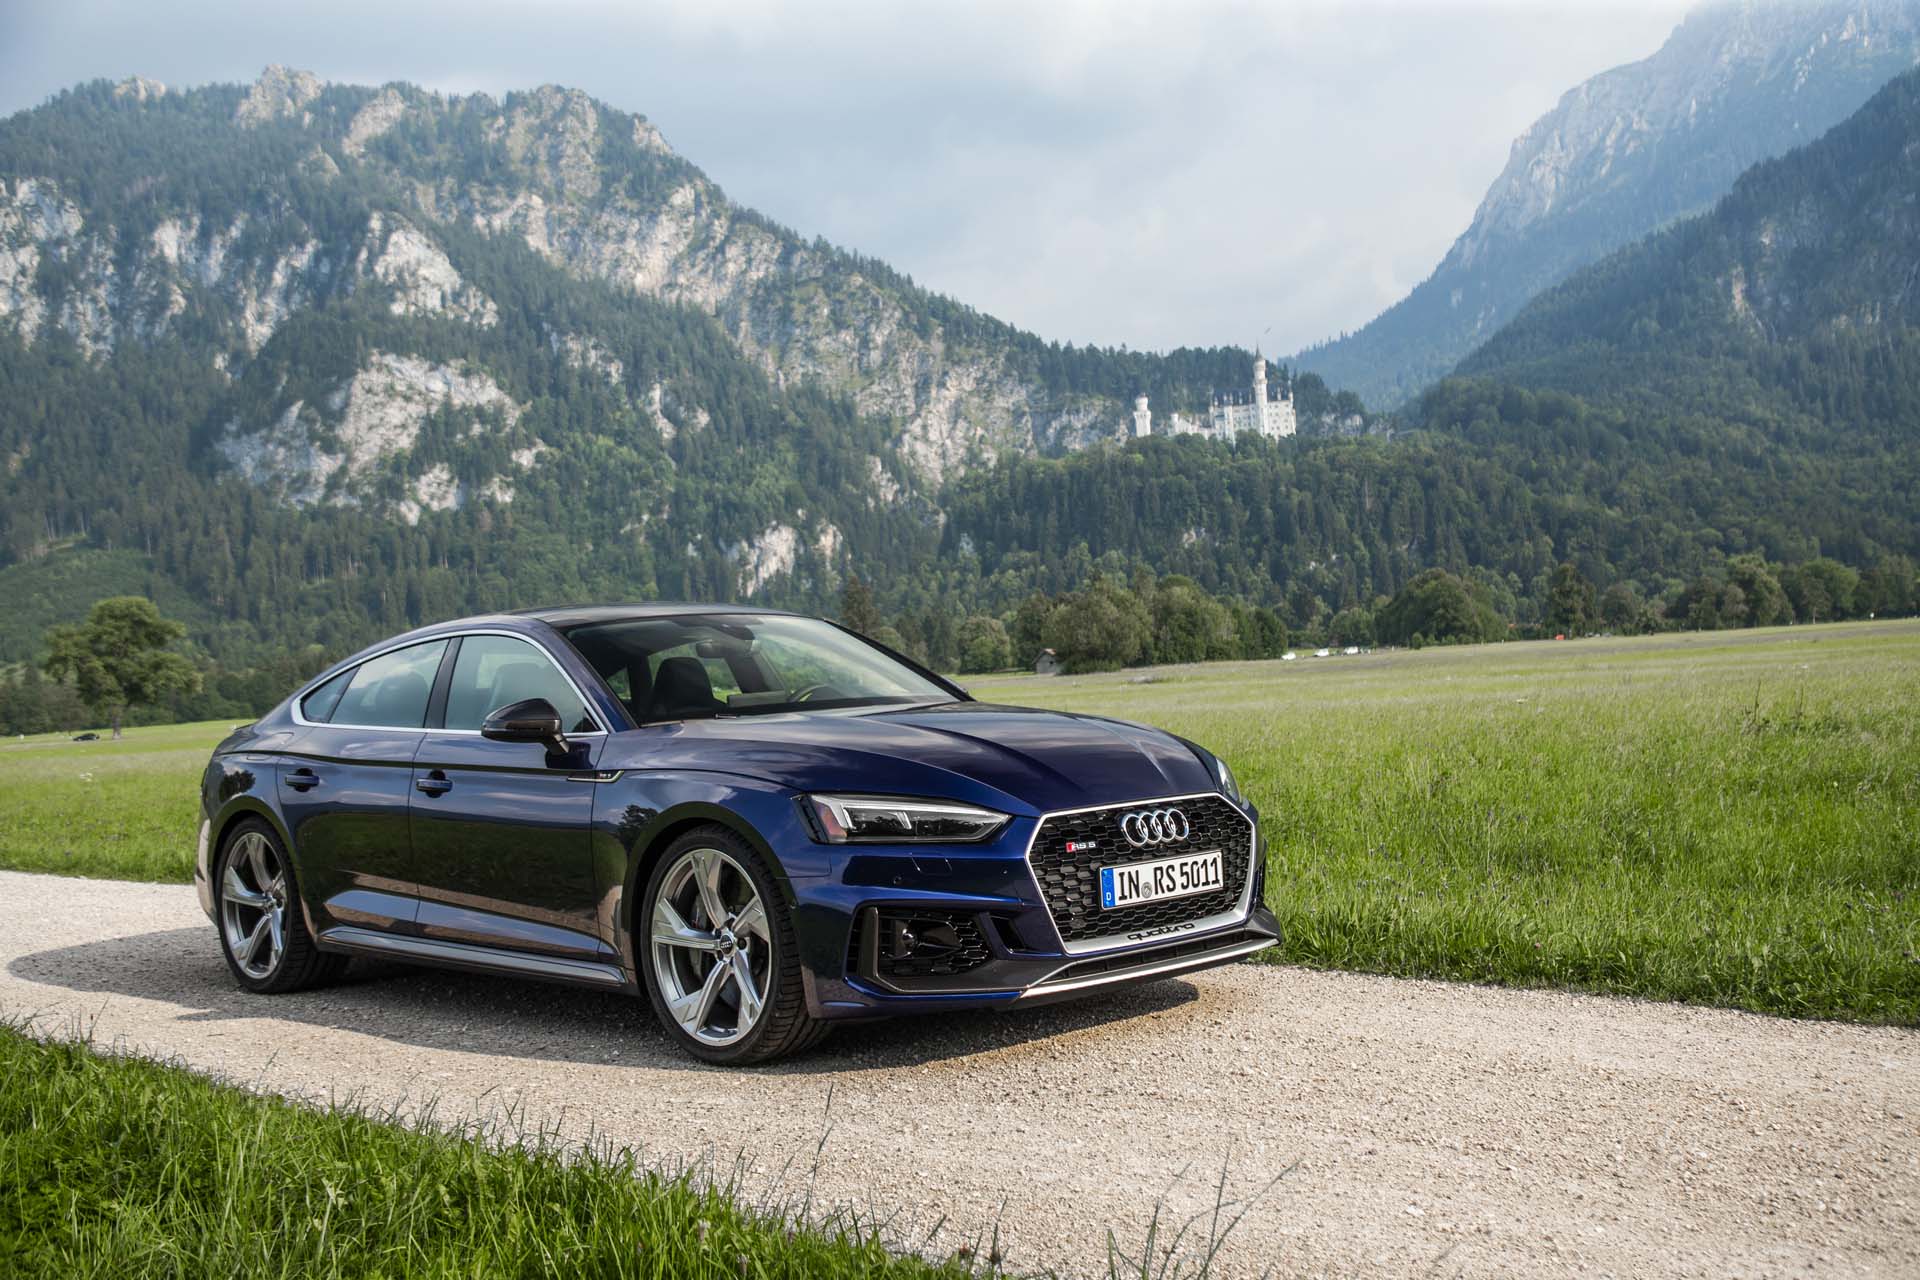 AUDI RS 5 SPORTBACK front angular view mountains on the background